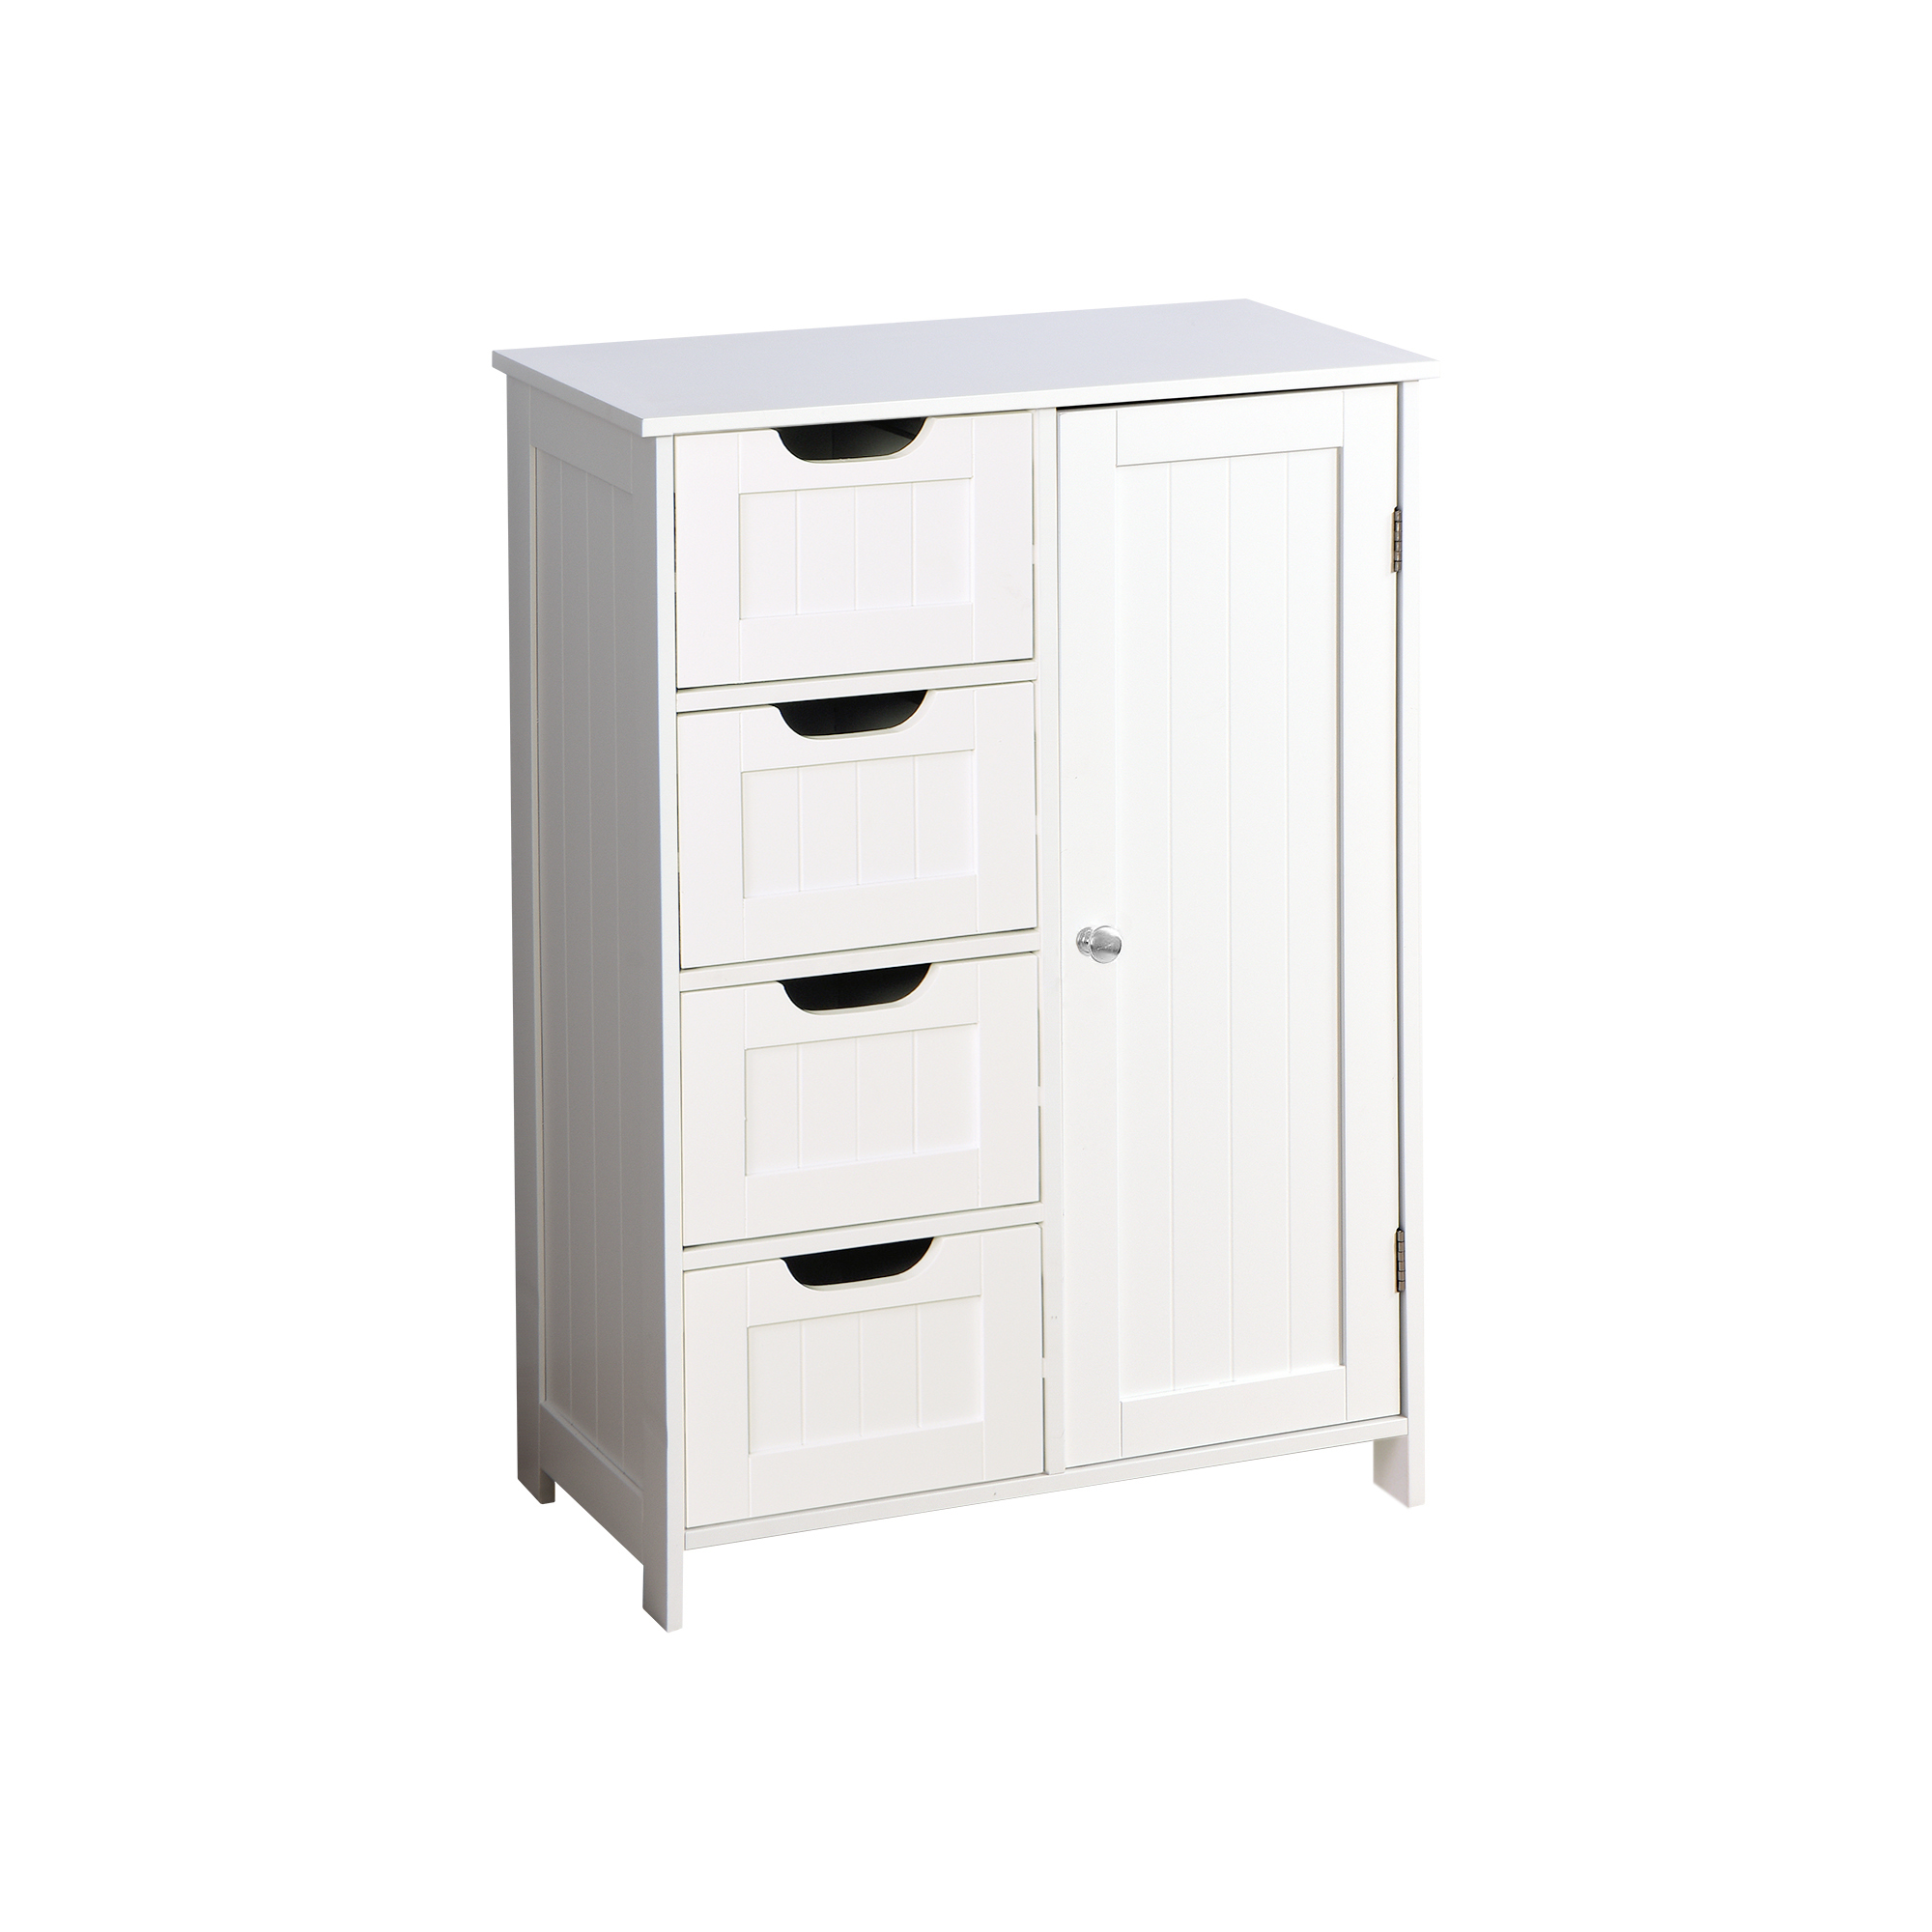 White Bathroom Storage Cabinet, Floor Cabinet with Adjustable Shelf and Drawers-Boyel Living